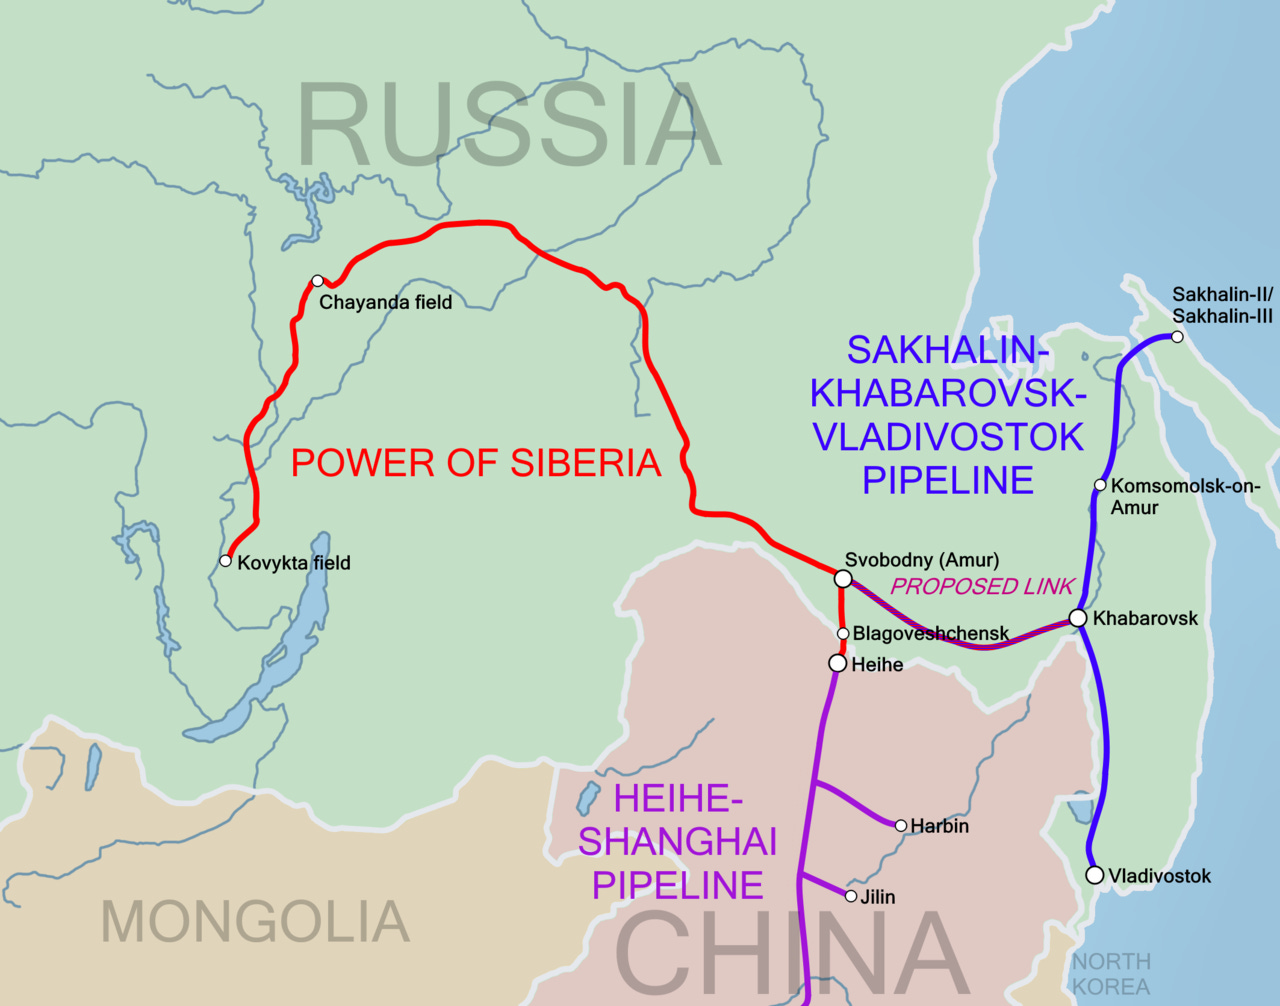 The routes of the Power of Siberia pipeline (left), the Sakhalin–Khabarovsk–Vladivostok pipeline (right) and the proposed link between them (centre)